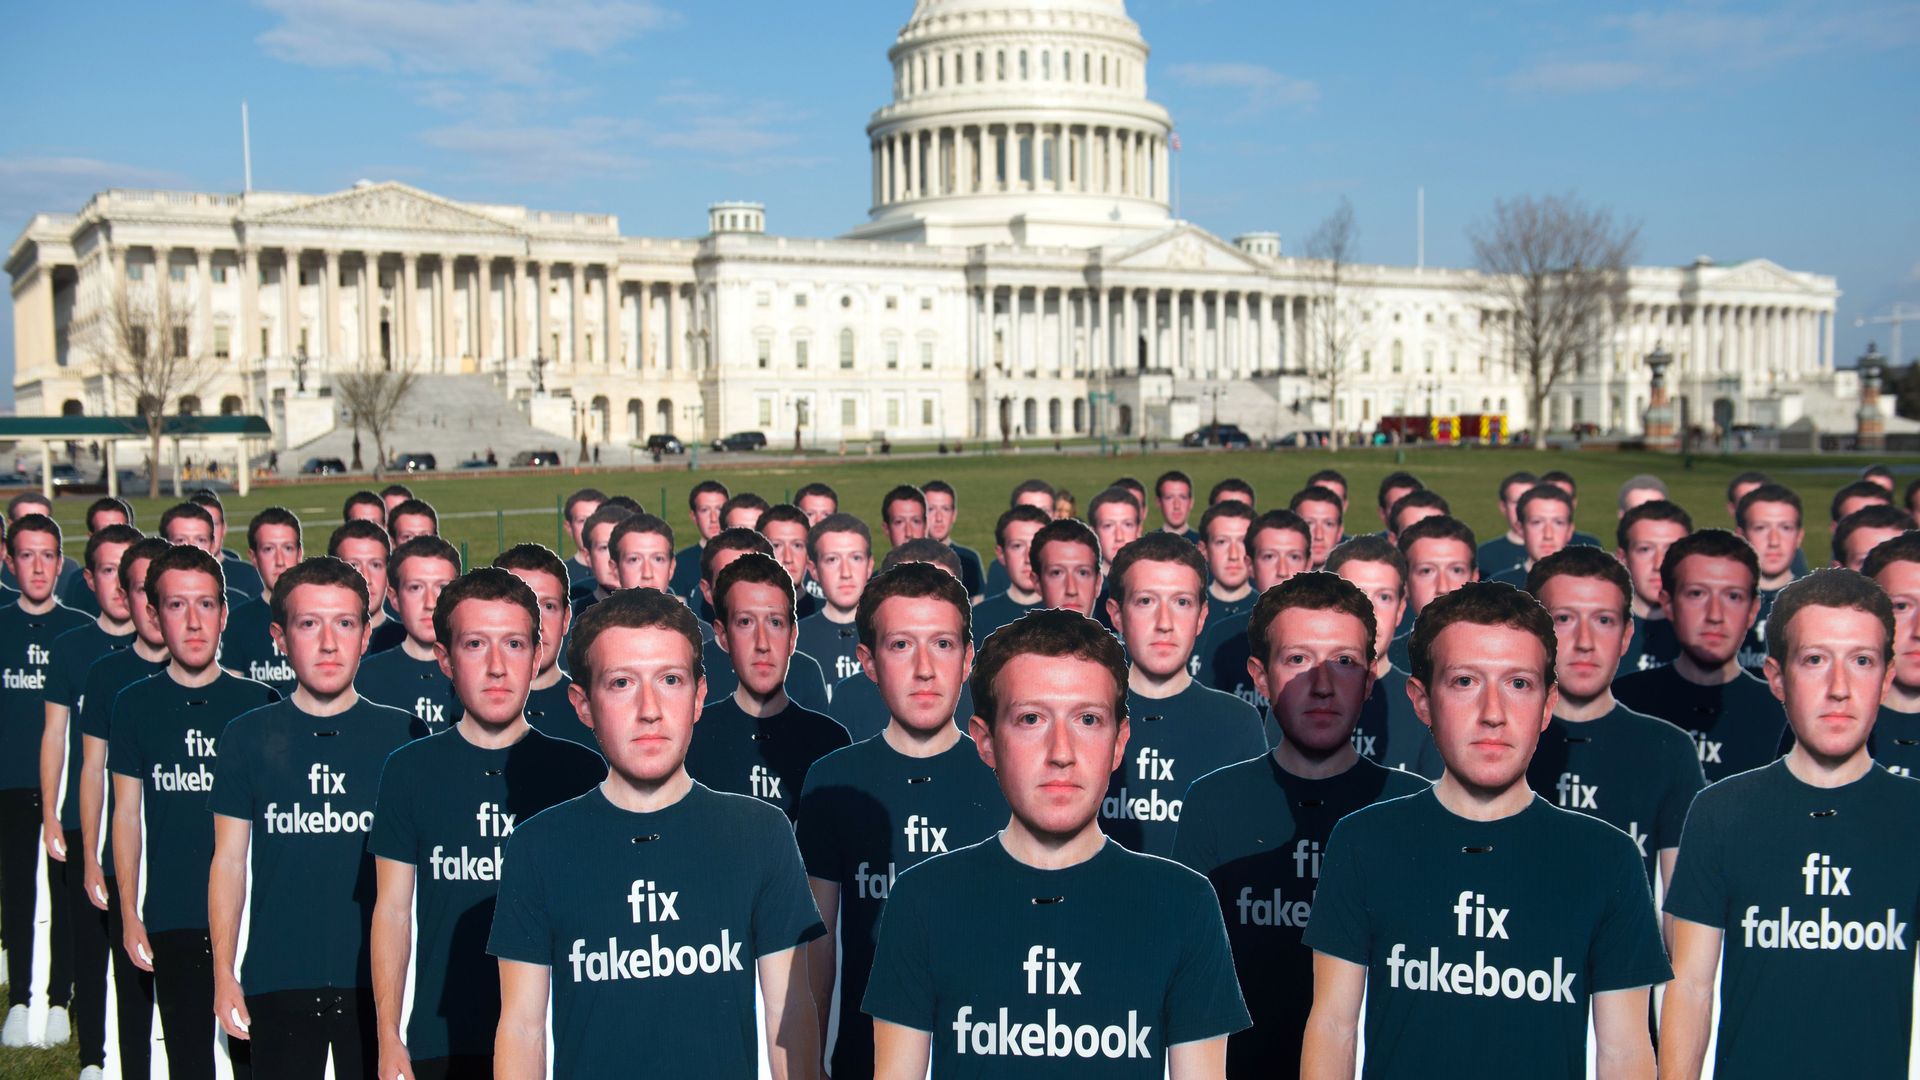 ne hundred cardboard cutouts of Facebook founder and CEO Mark Zuckerberg stand outside the US Capitol 